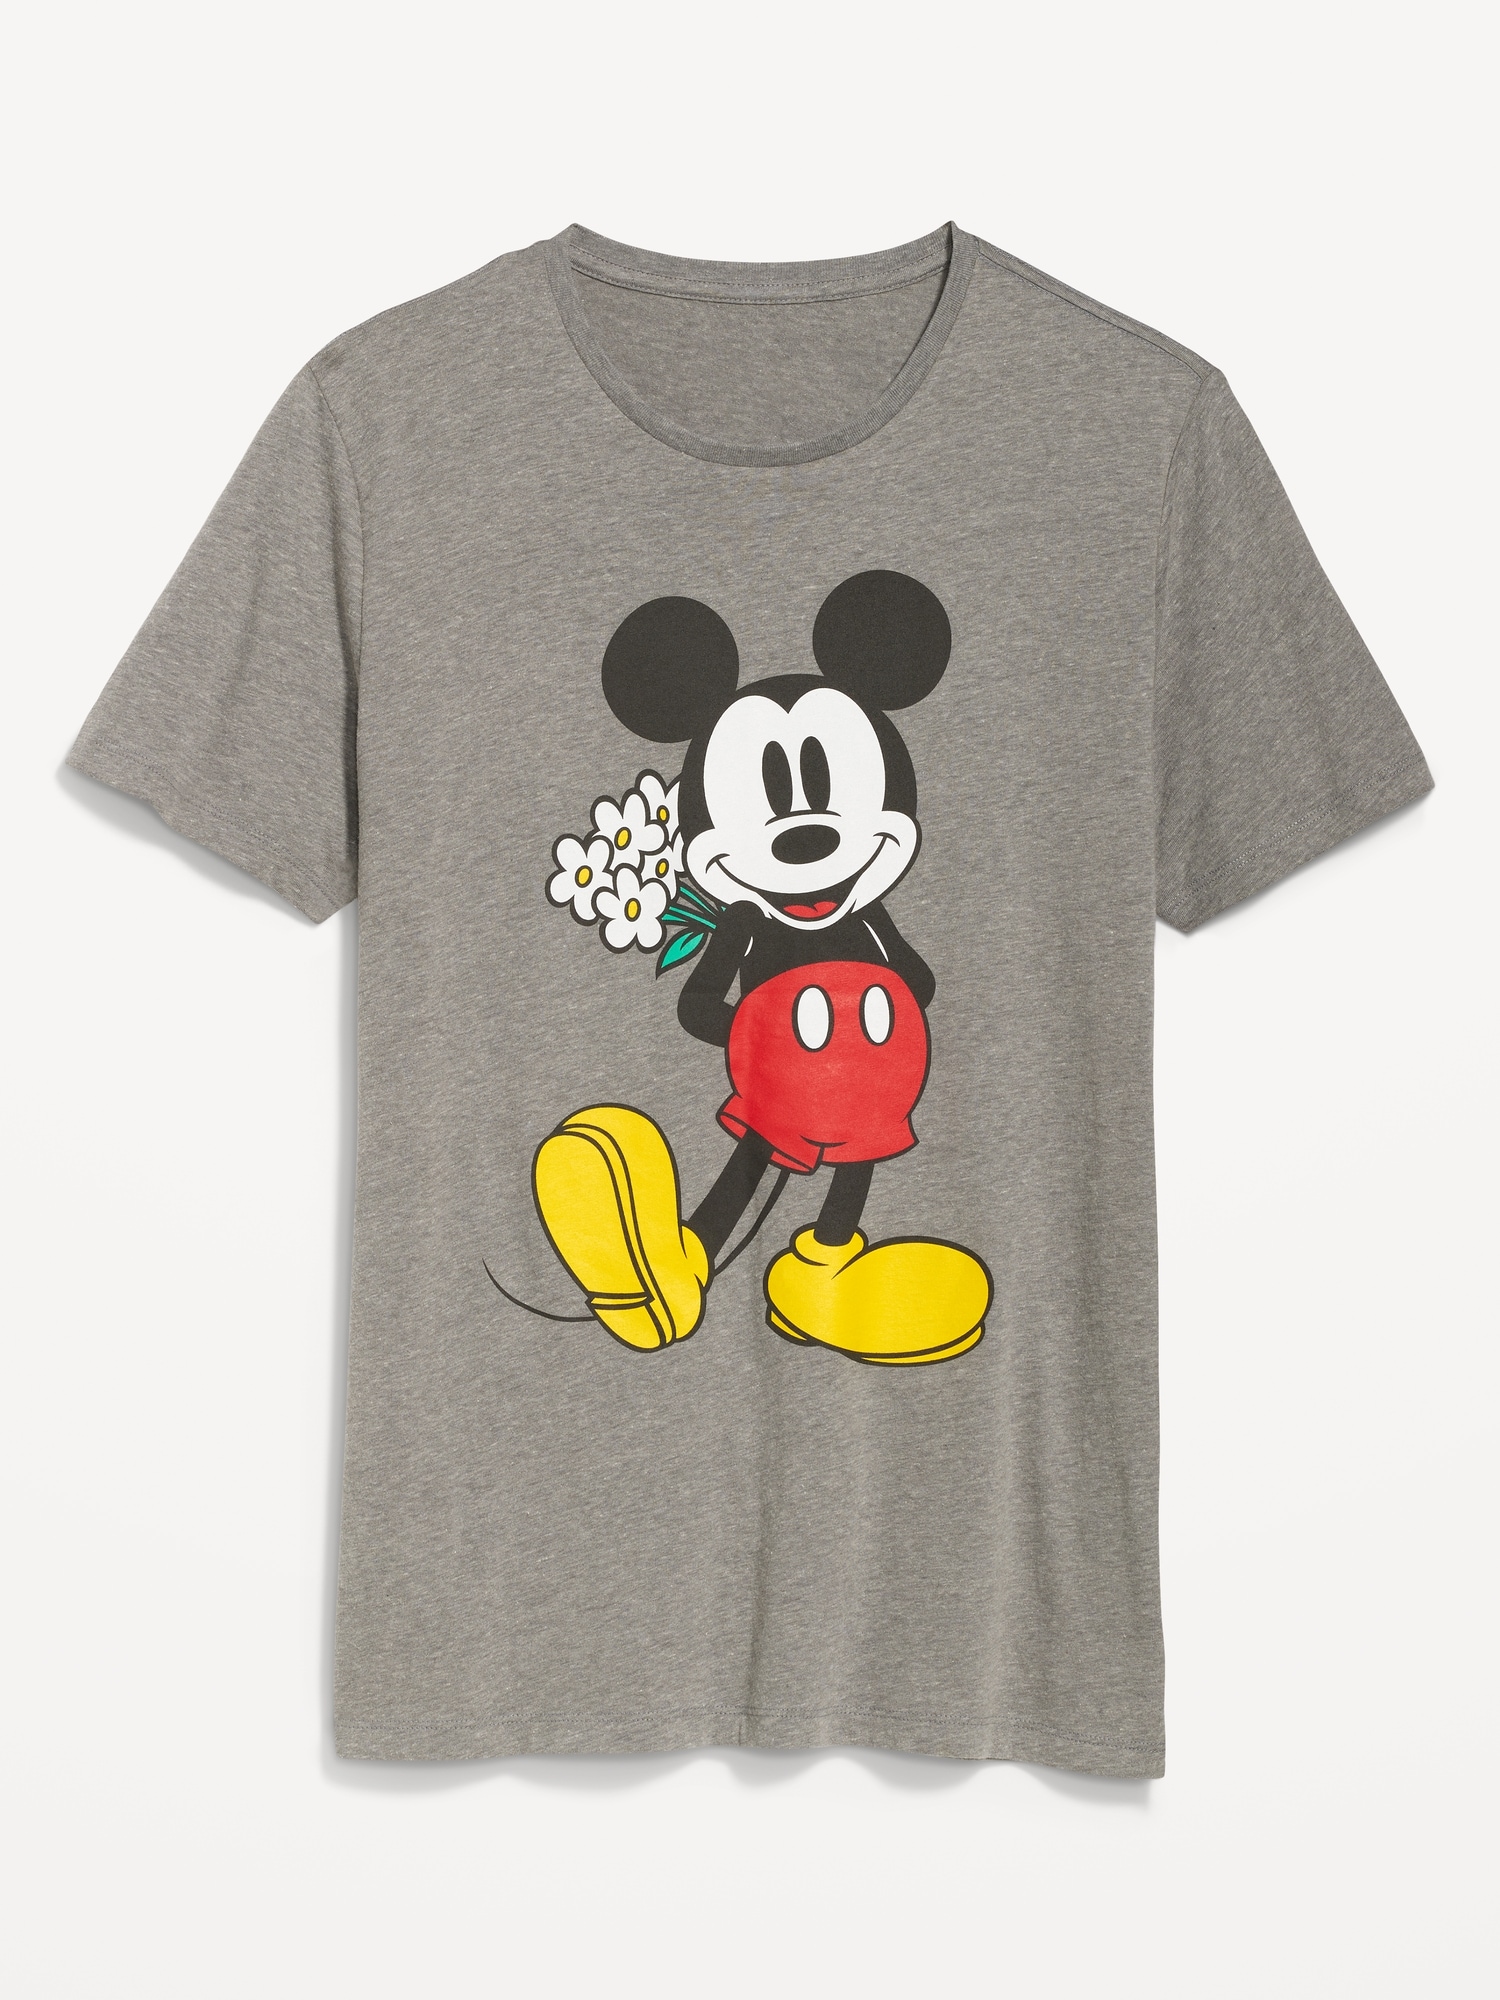 disney-mickey-mouse-top-old-navy